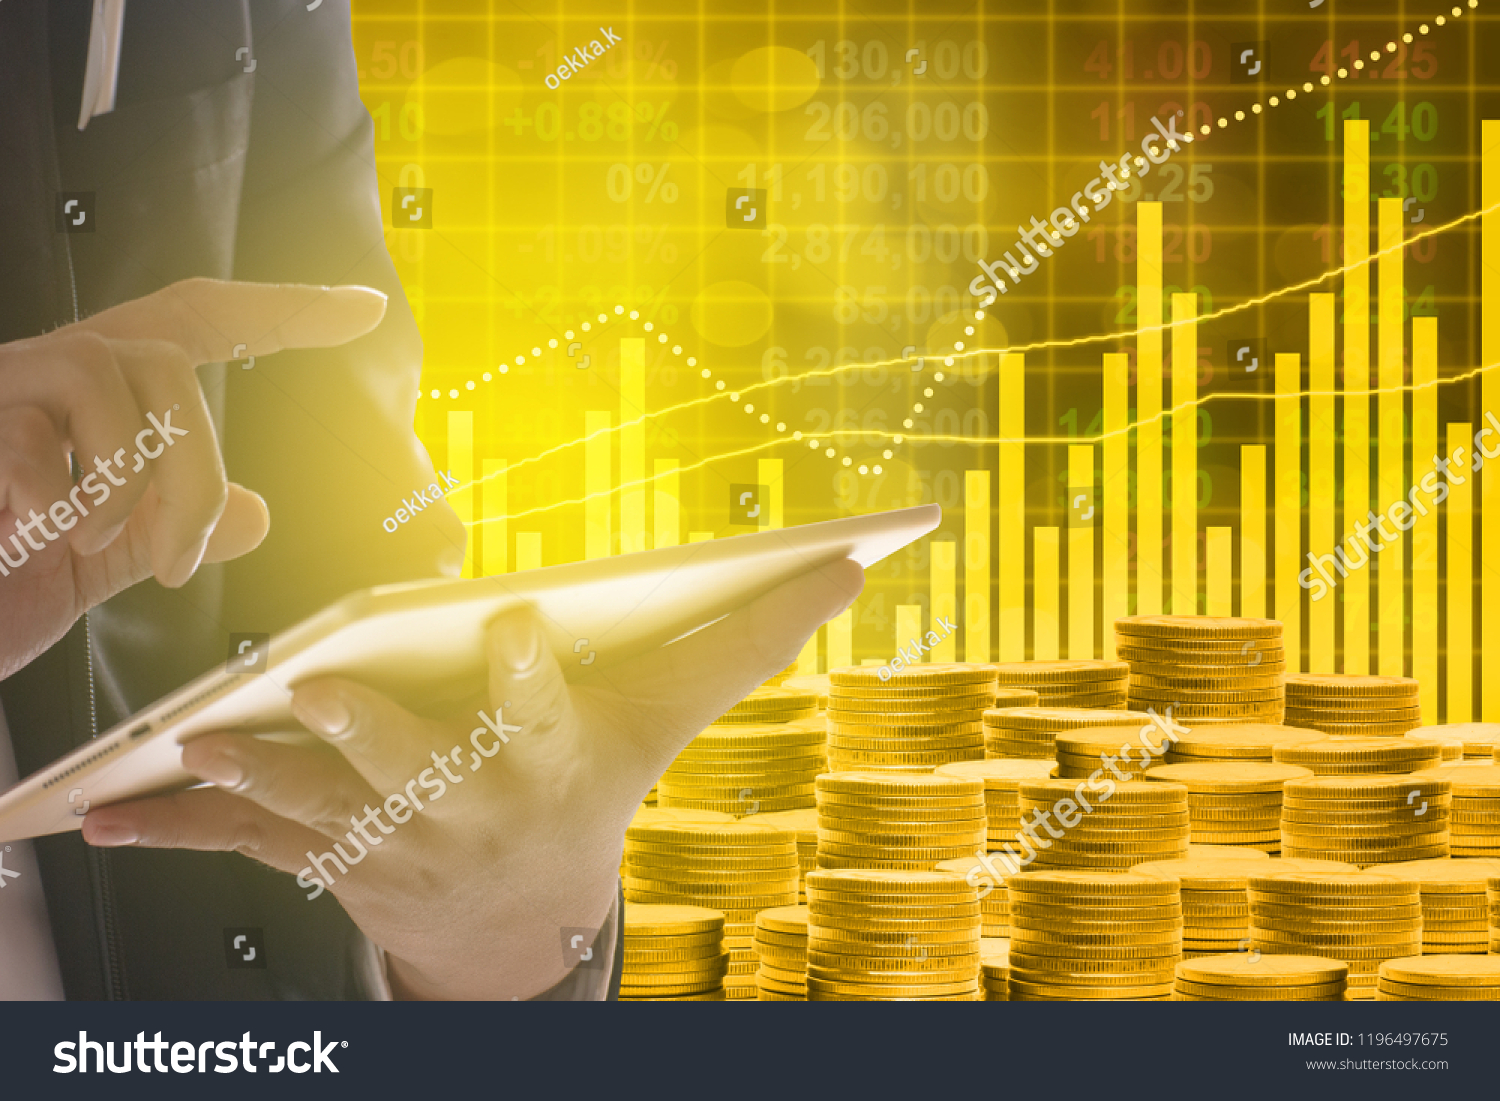 Business Golden Coin Digital Currency On Stock Photo Shutterstock